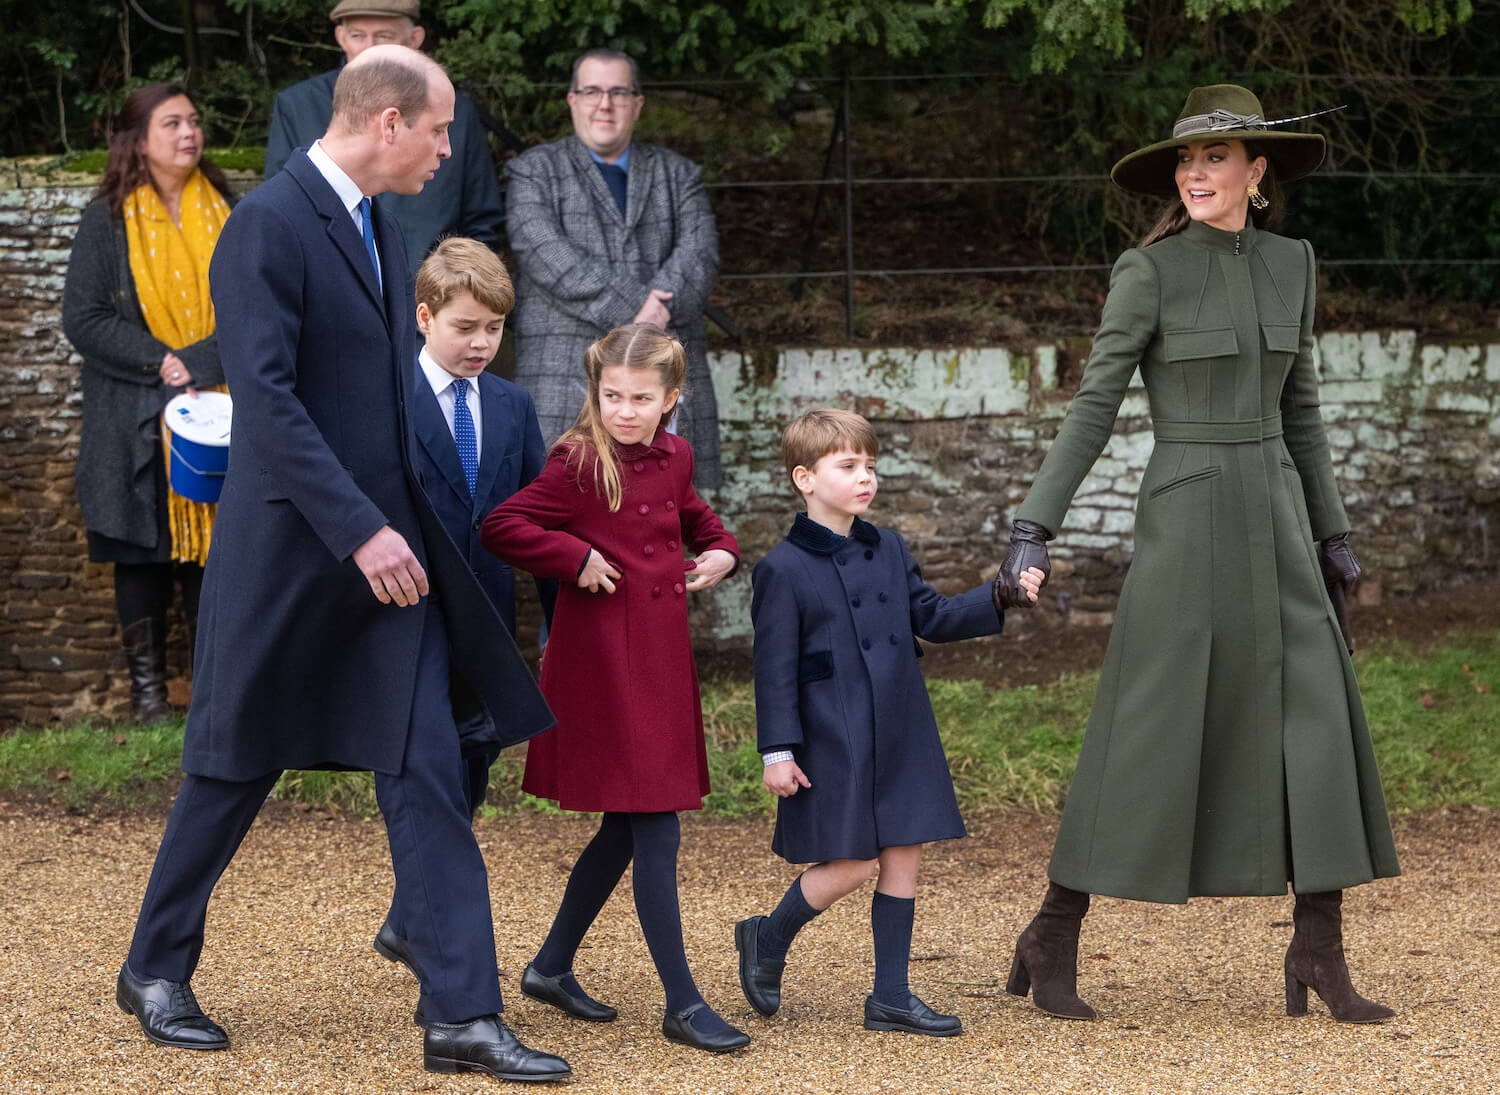 Prince William and Kate Middleton walk outside with their children Prince George, Princess Charlotte, and Prince Louis